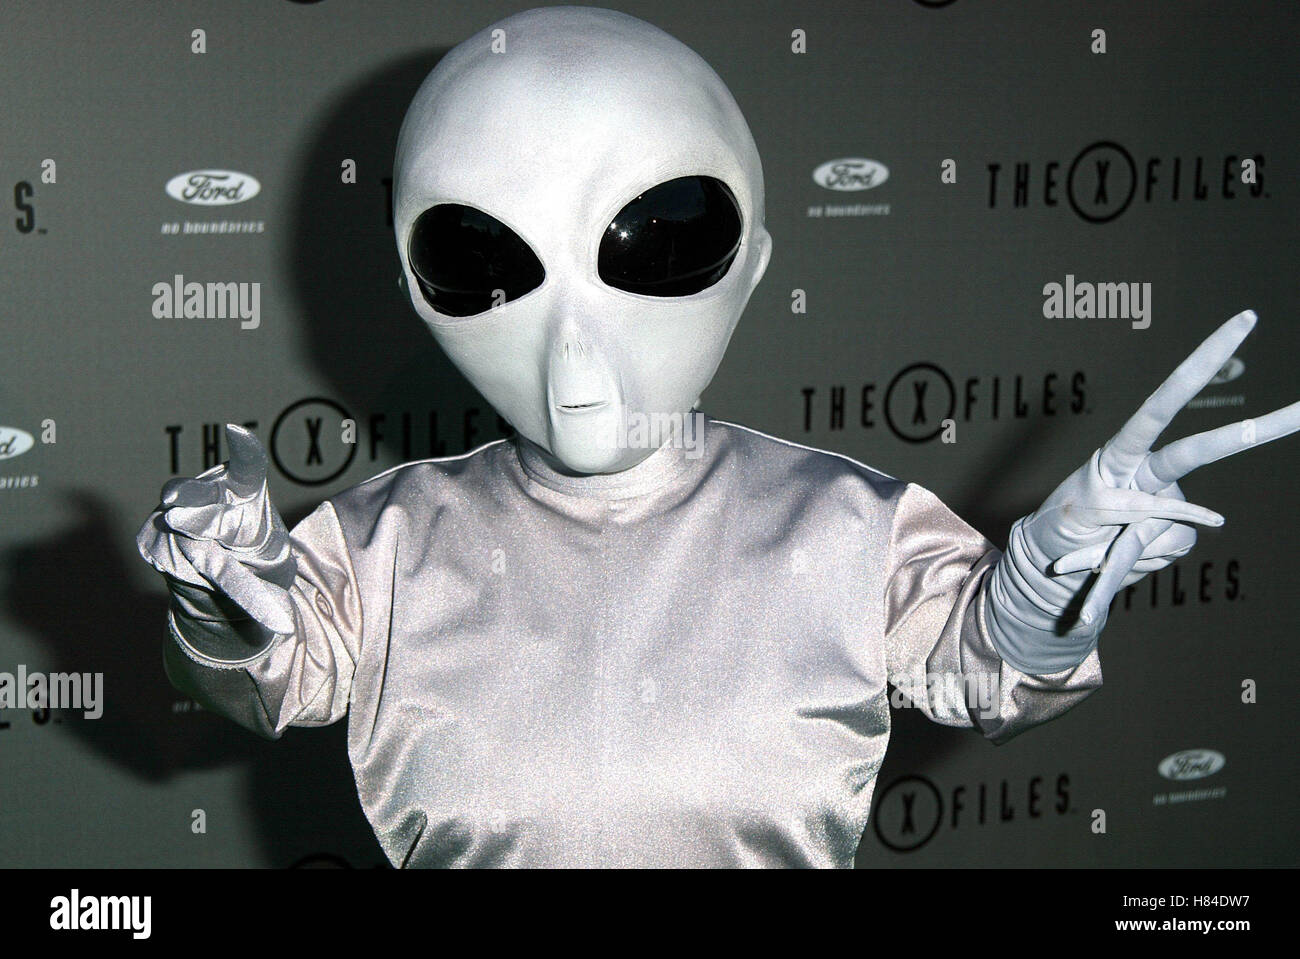 ALIEN X-FILES FINALE WARP PARTY HOUSE OF BLUES HOLLYWOOD LOS ANGELES USA 27 April 2002 Stock Photo